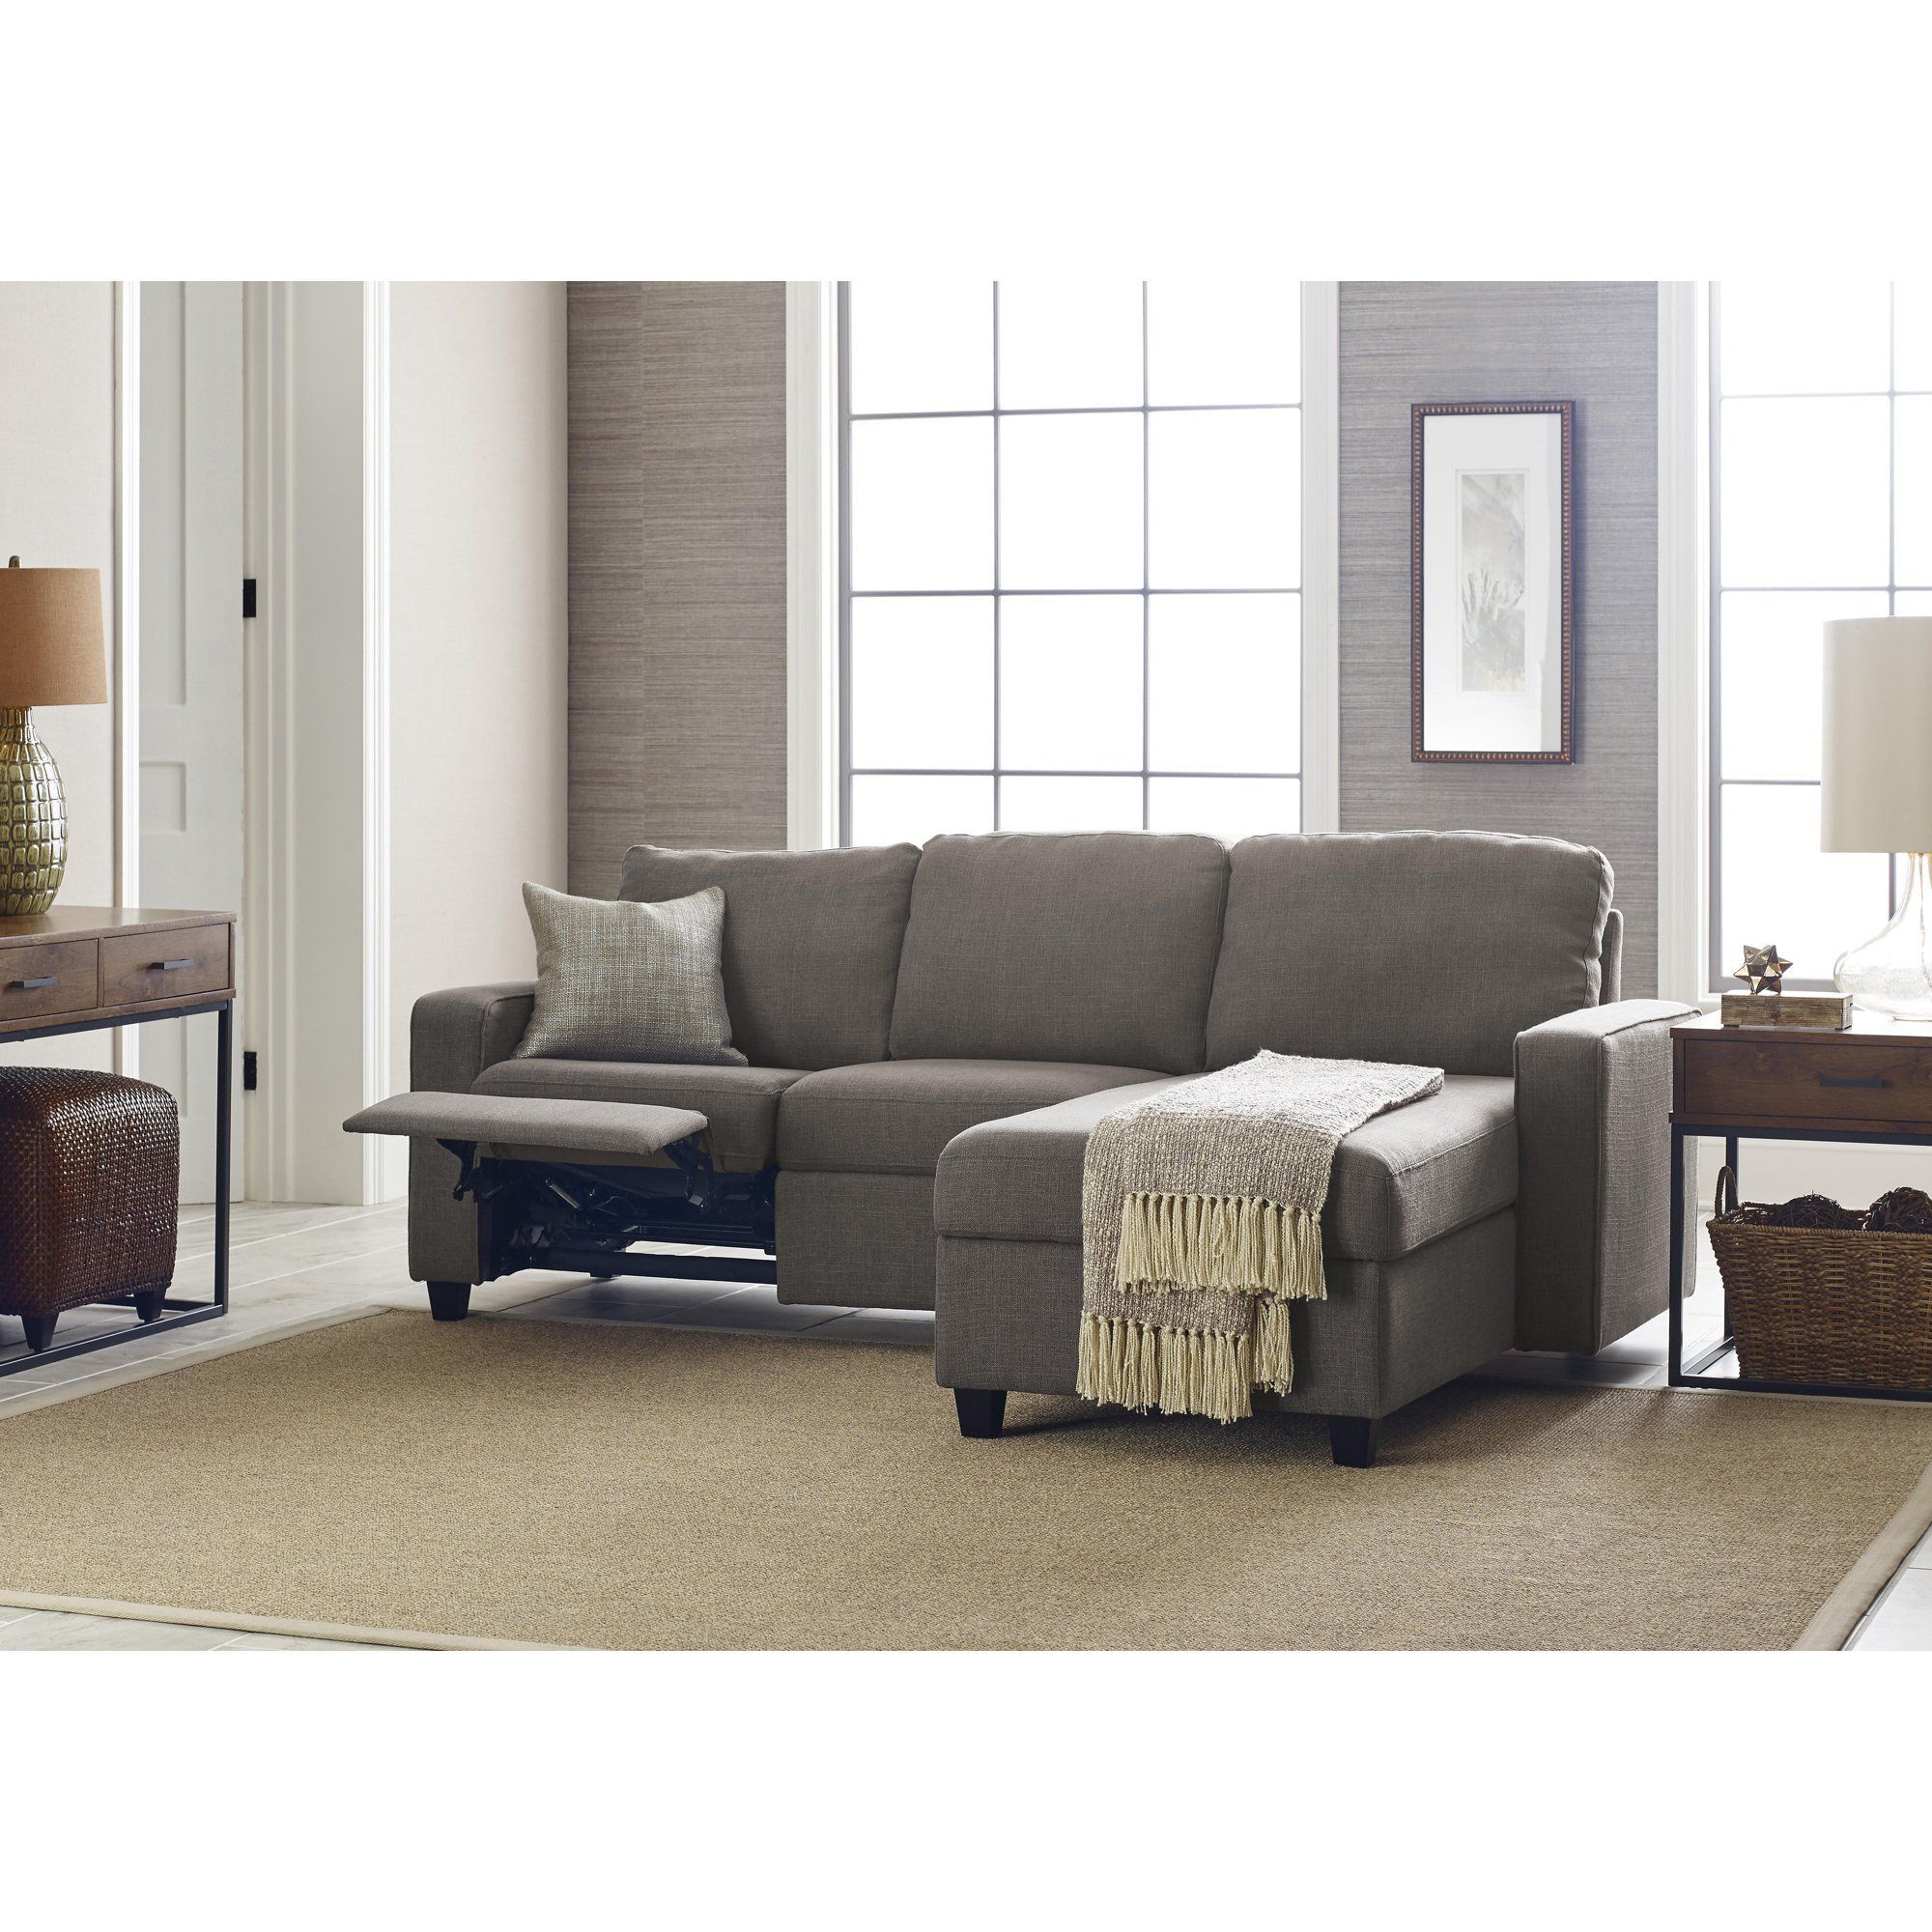 Serta Palisades Reclining Sectional With Right Storage Within Copenhagen Reclining Sectional Sofas With Right Storage Chaise (View 4 of 15)